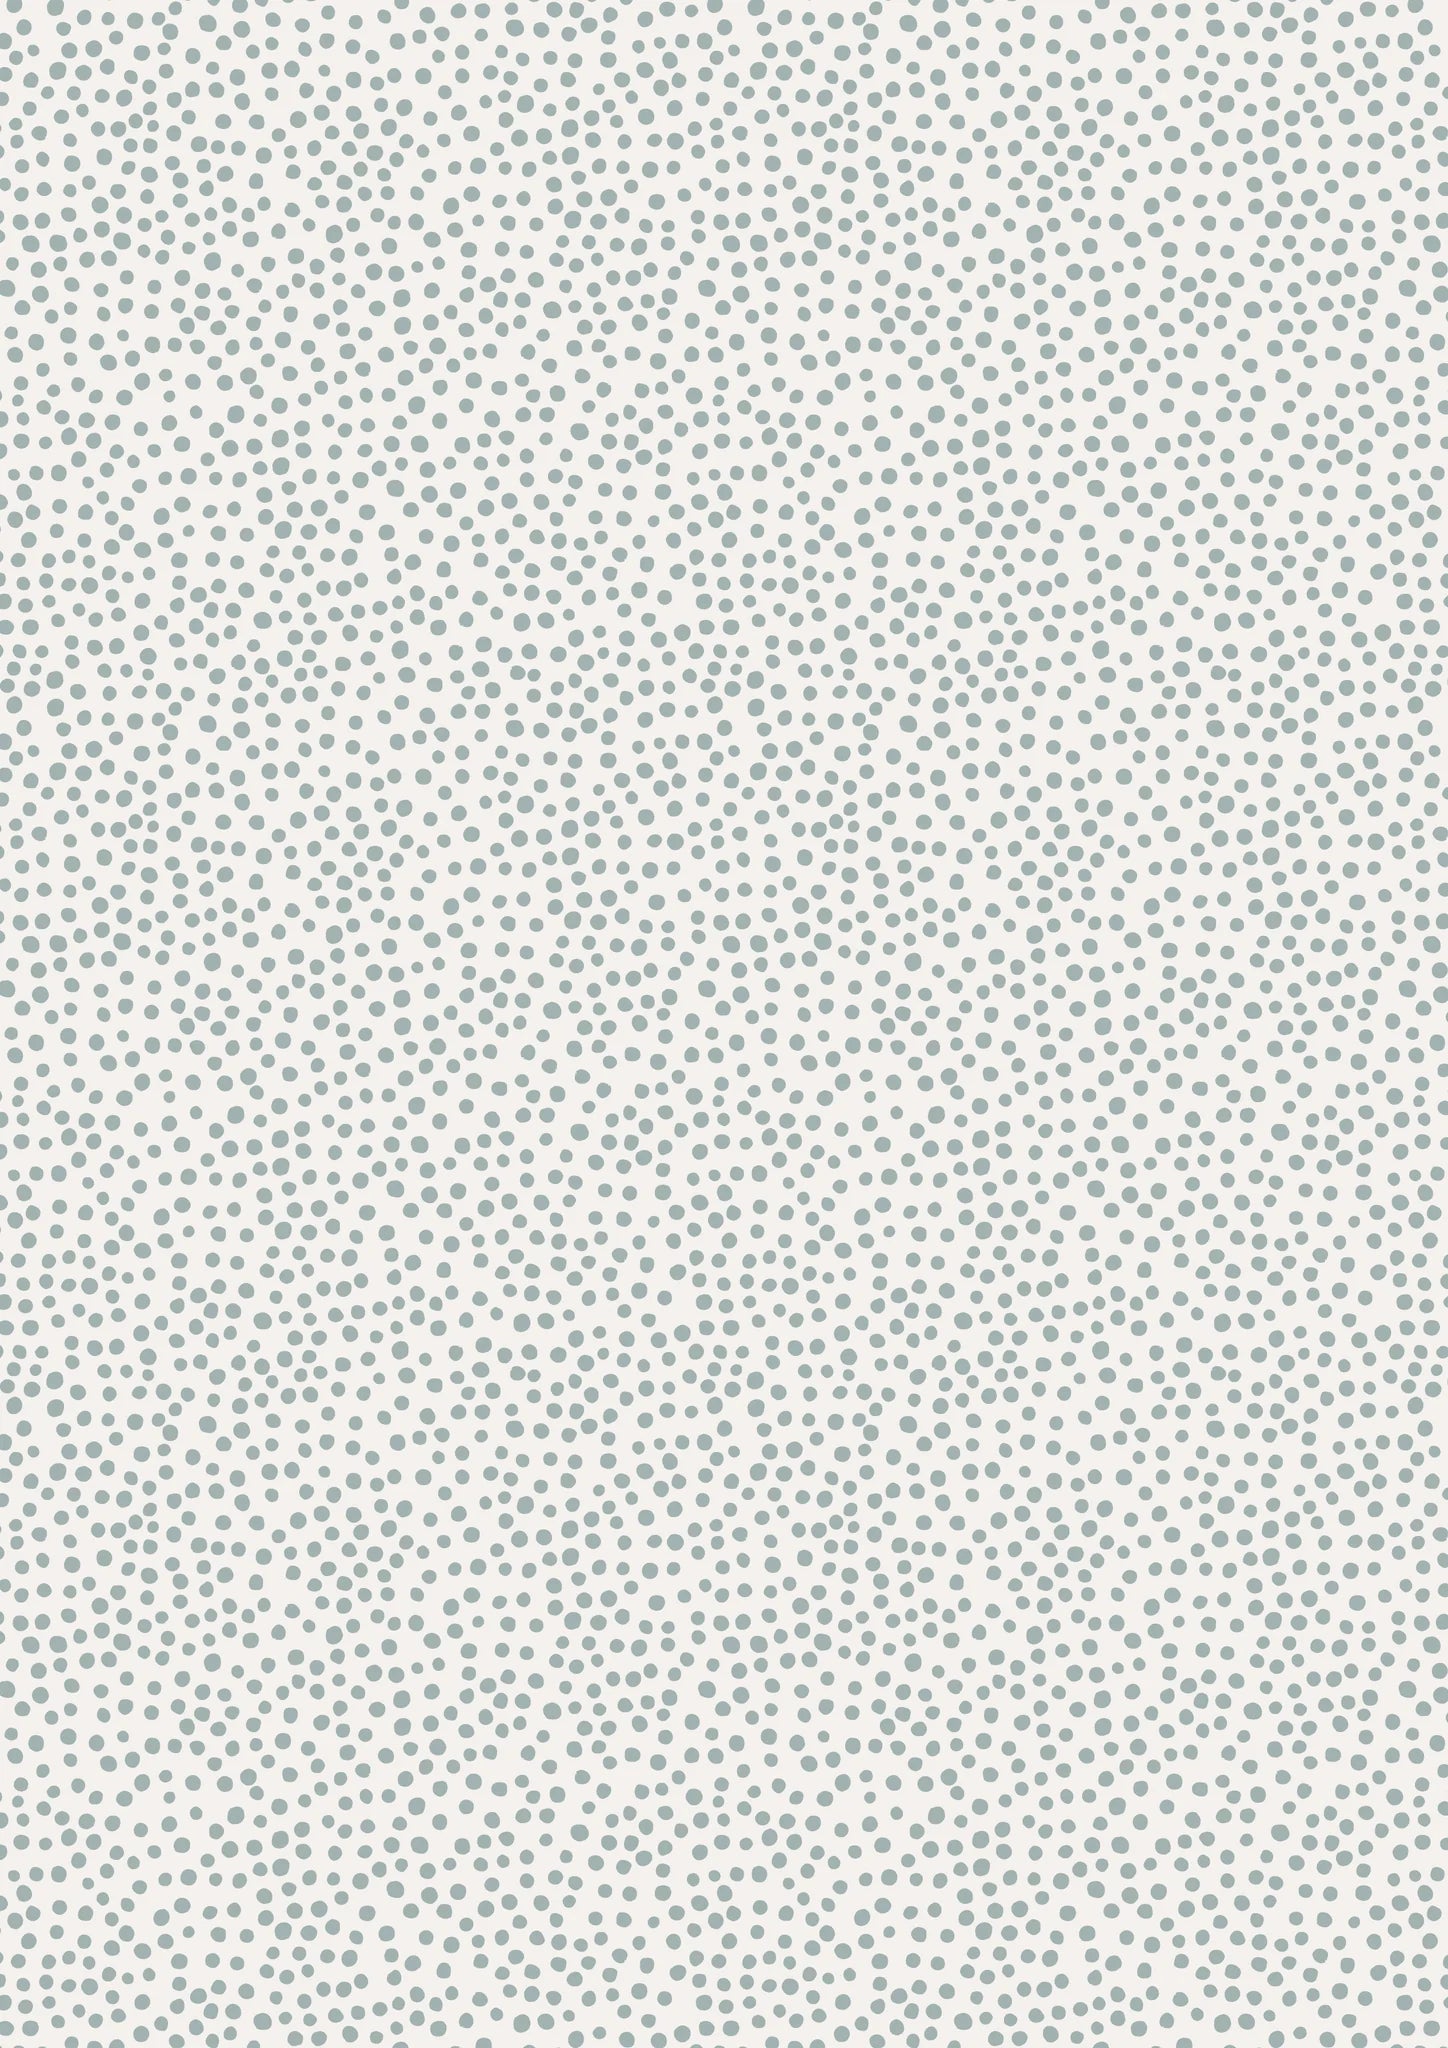 Winter in Bluebell Wood-Flannel Blue/Grey dots on cream